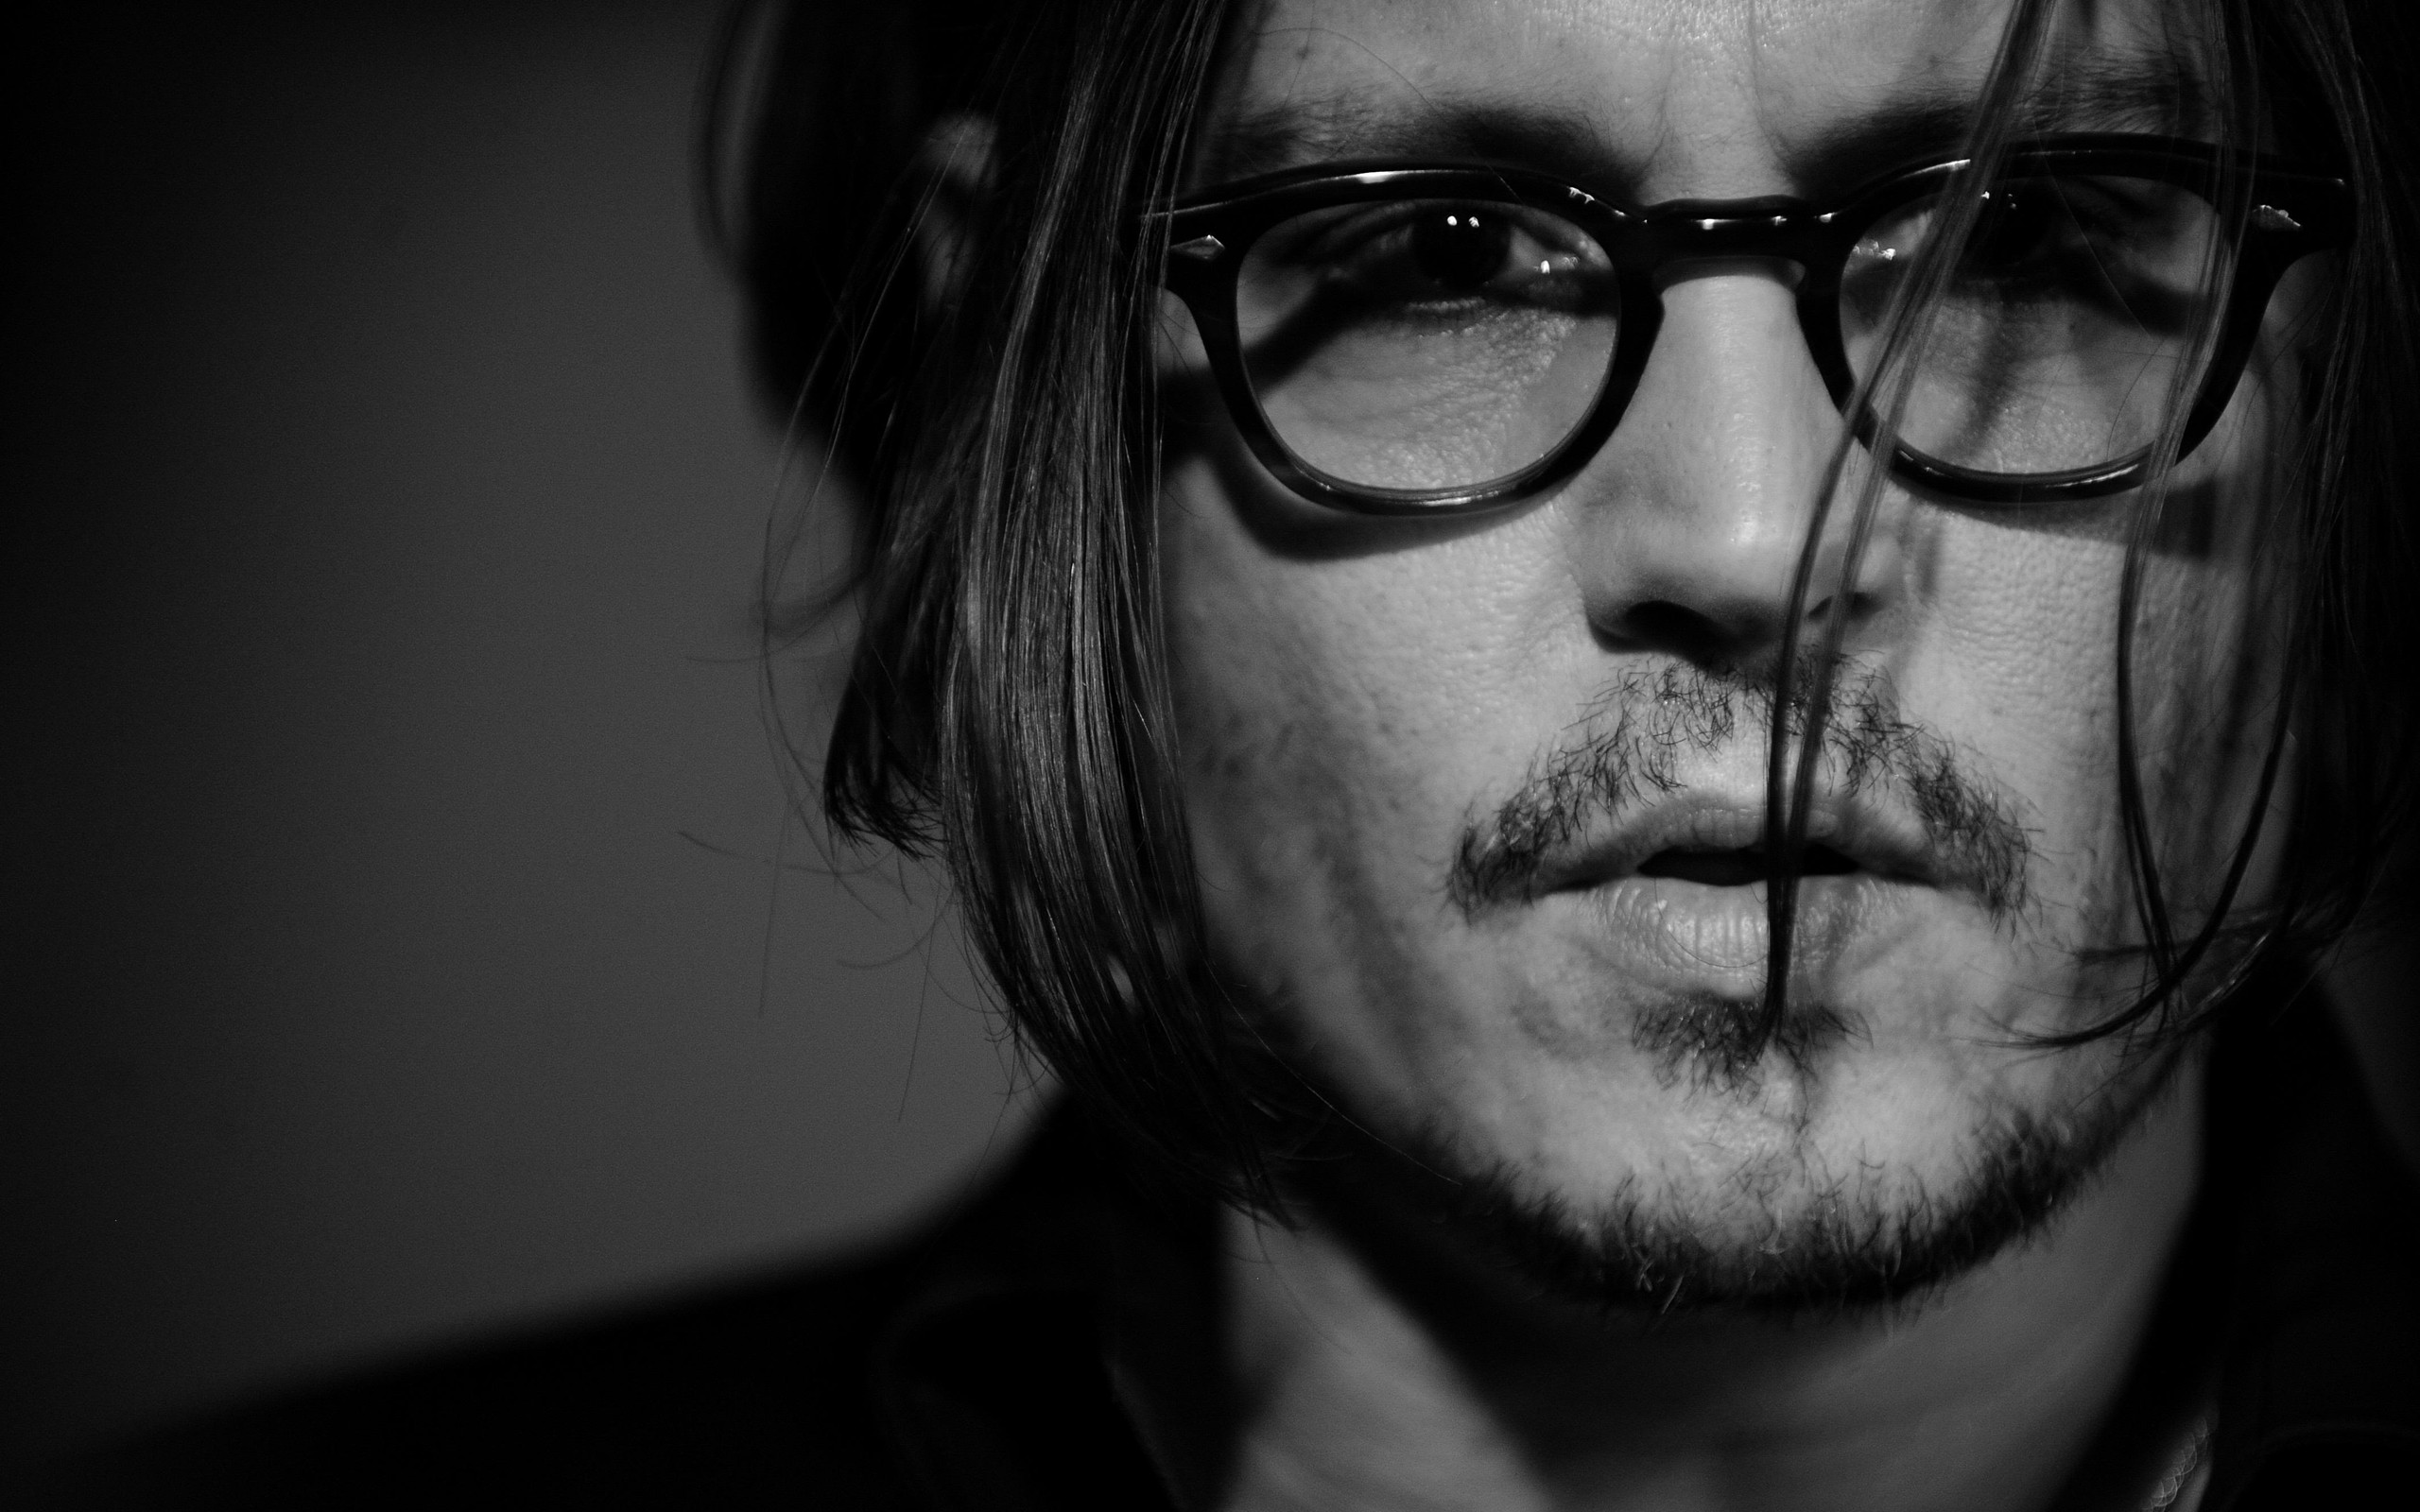 Movie News: Johnny Depp doing another musical